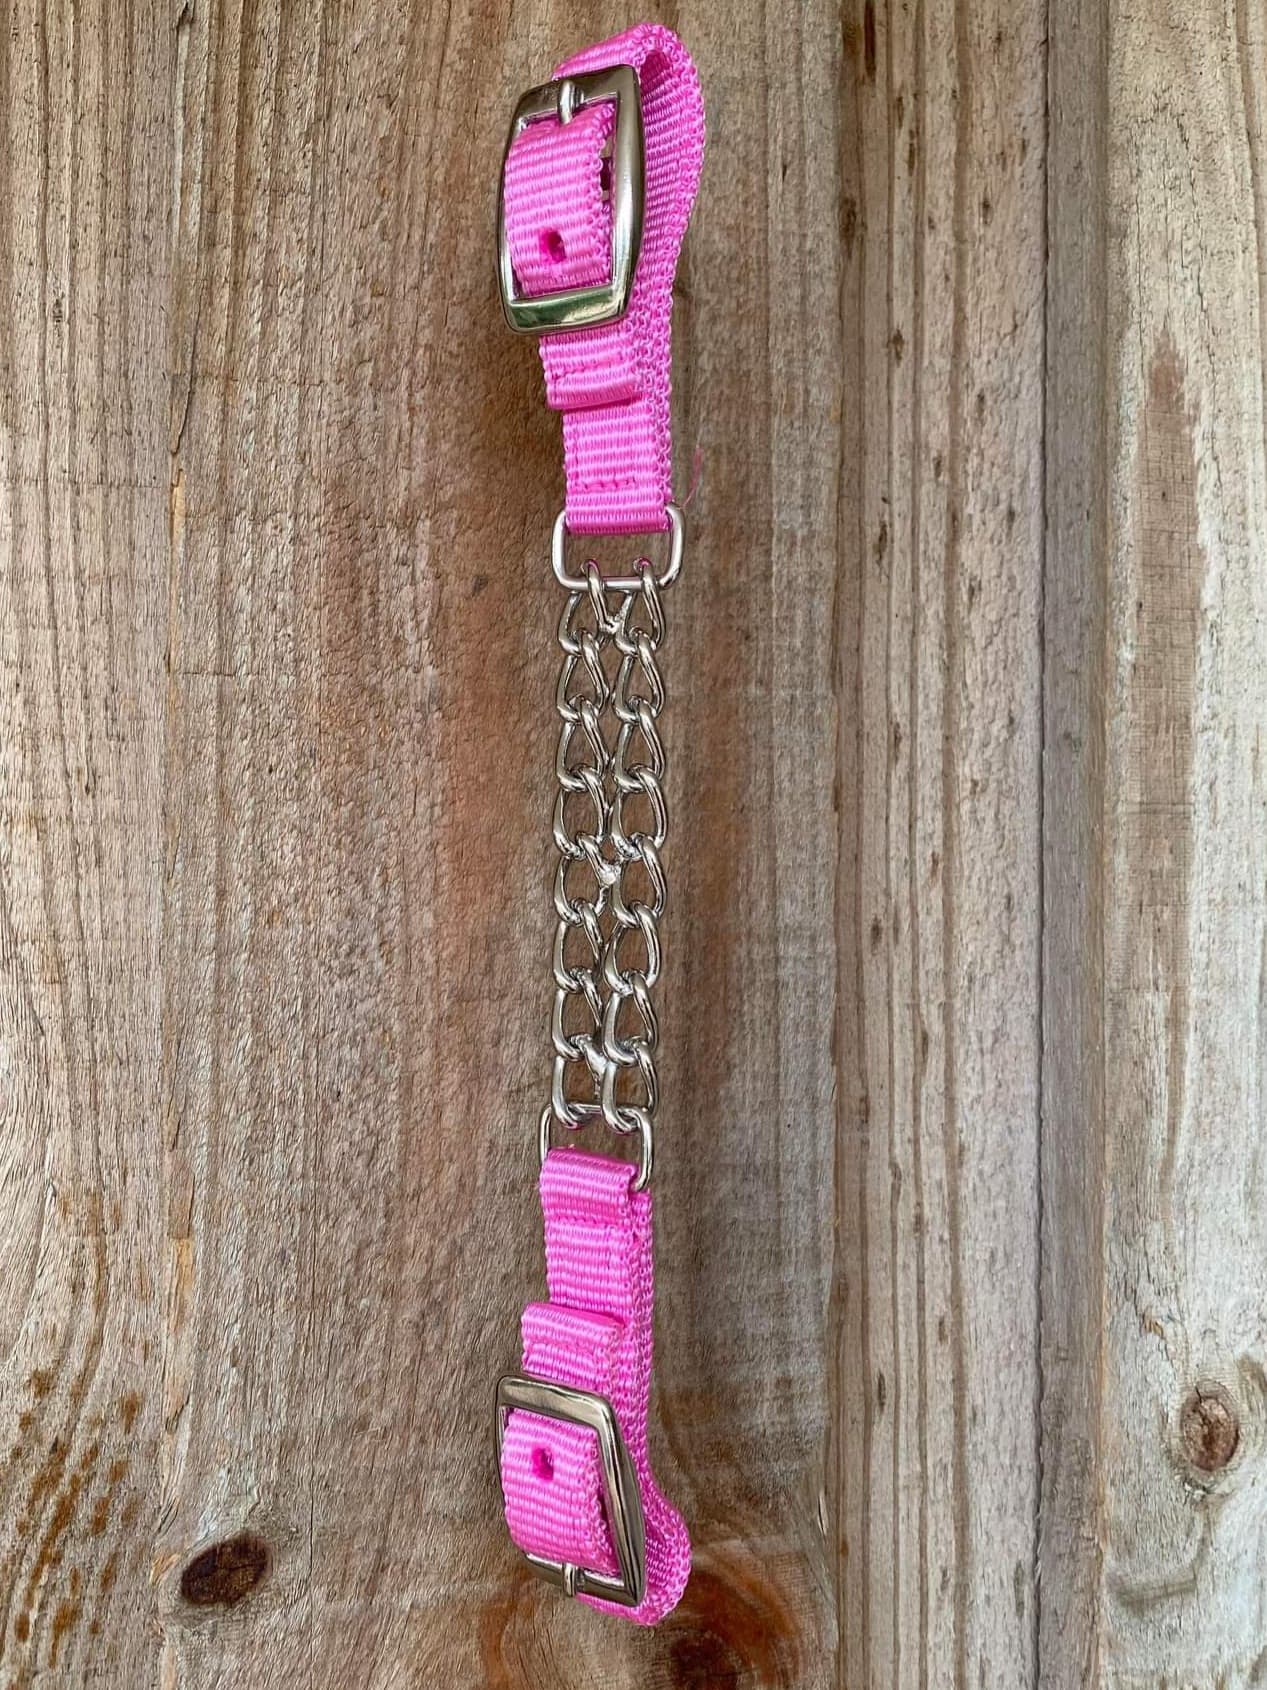 Curb Strap - Pink Nylon Chain fully adjustable  curb strap